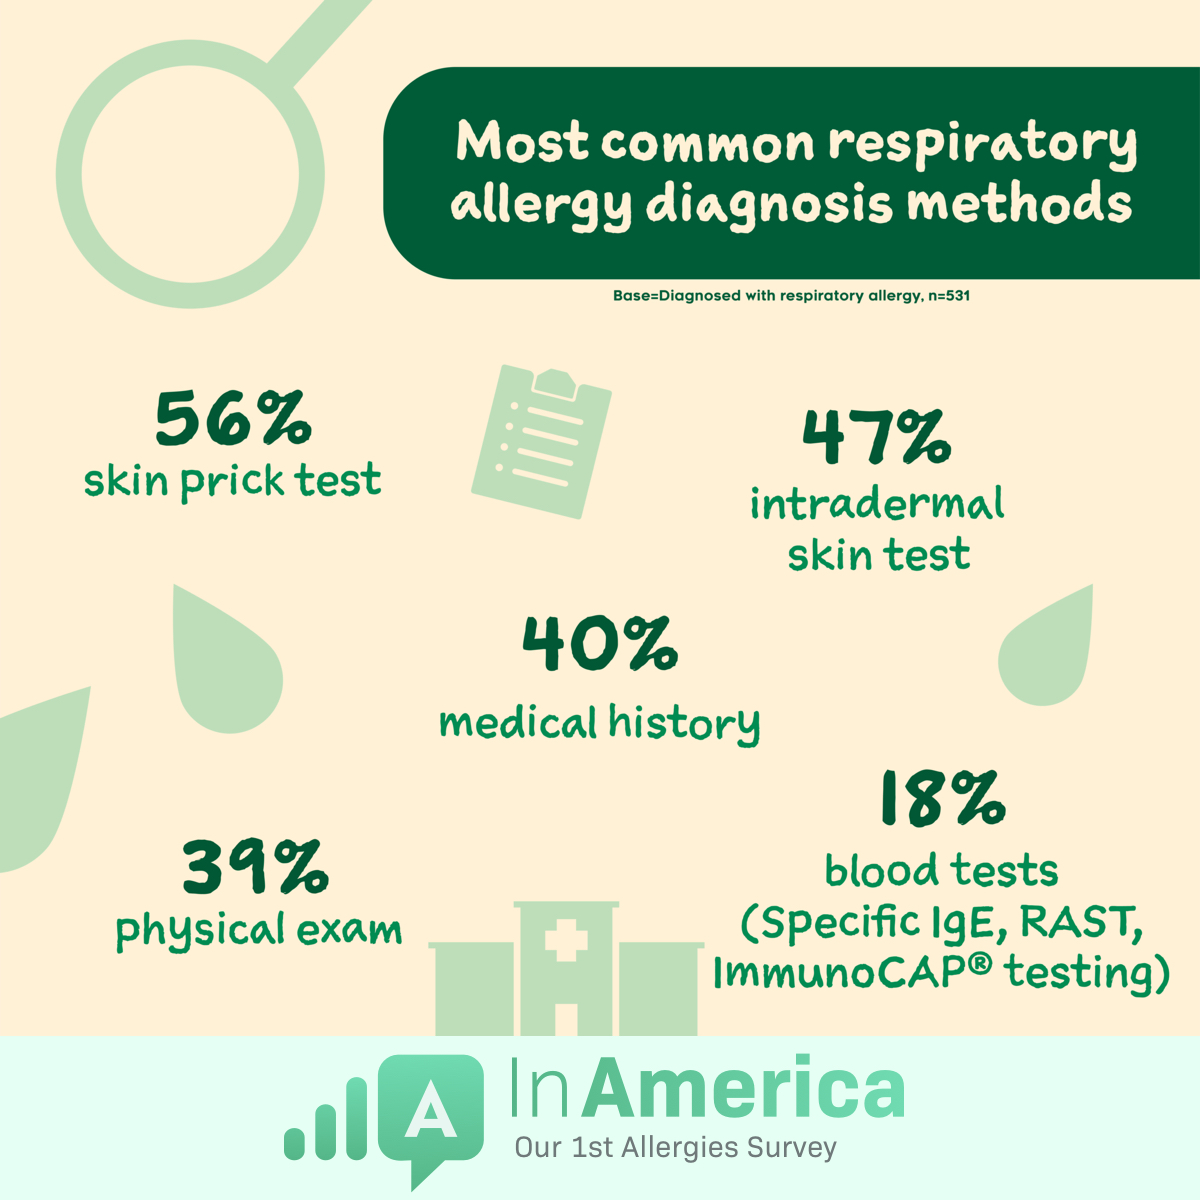 The most common methods for respiratory allergy diagnosis are skin tests, medical history, physical exams, and blood tests.